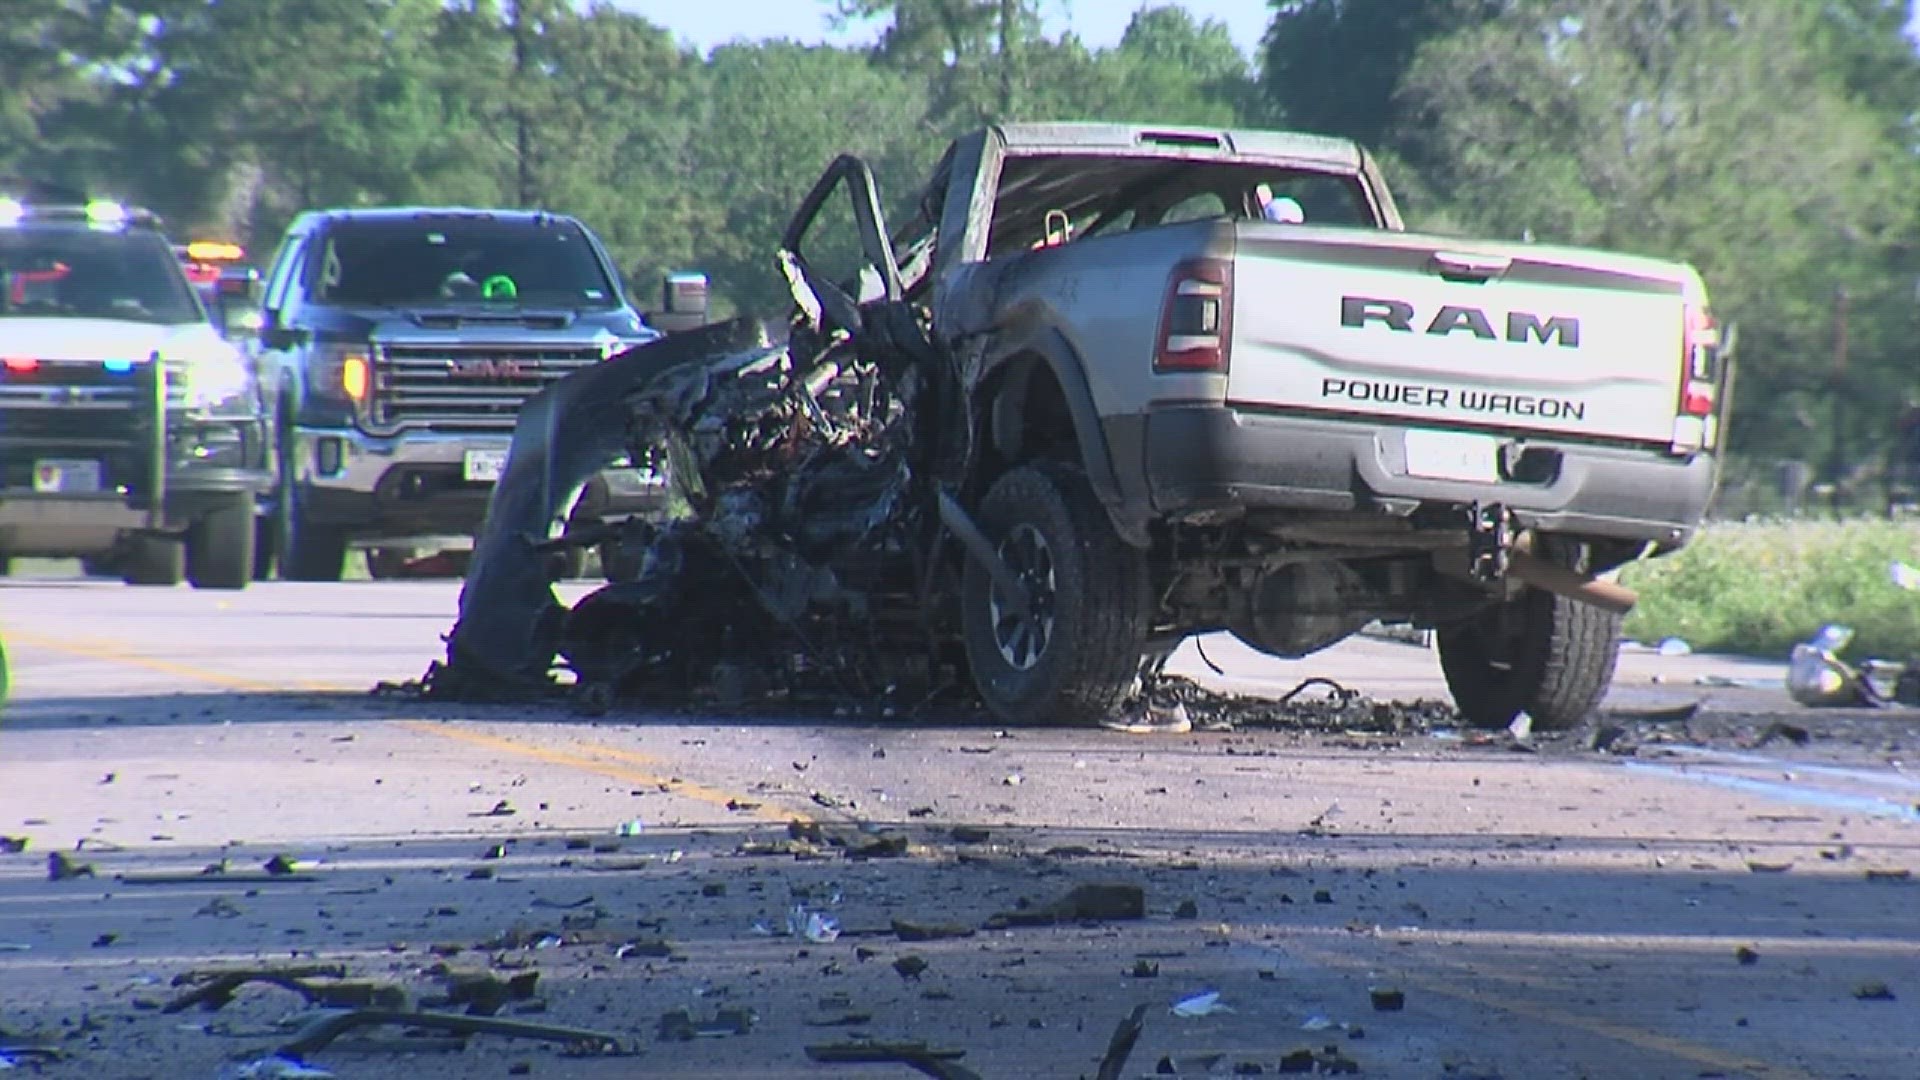 Texas Department of Public Safety troopers are investigating a fiery wreck Wednesday morning along Texas Highway 62 near County Road 784 south of Buna.